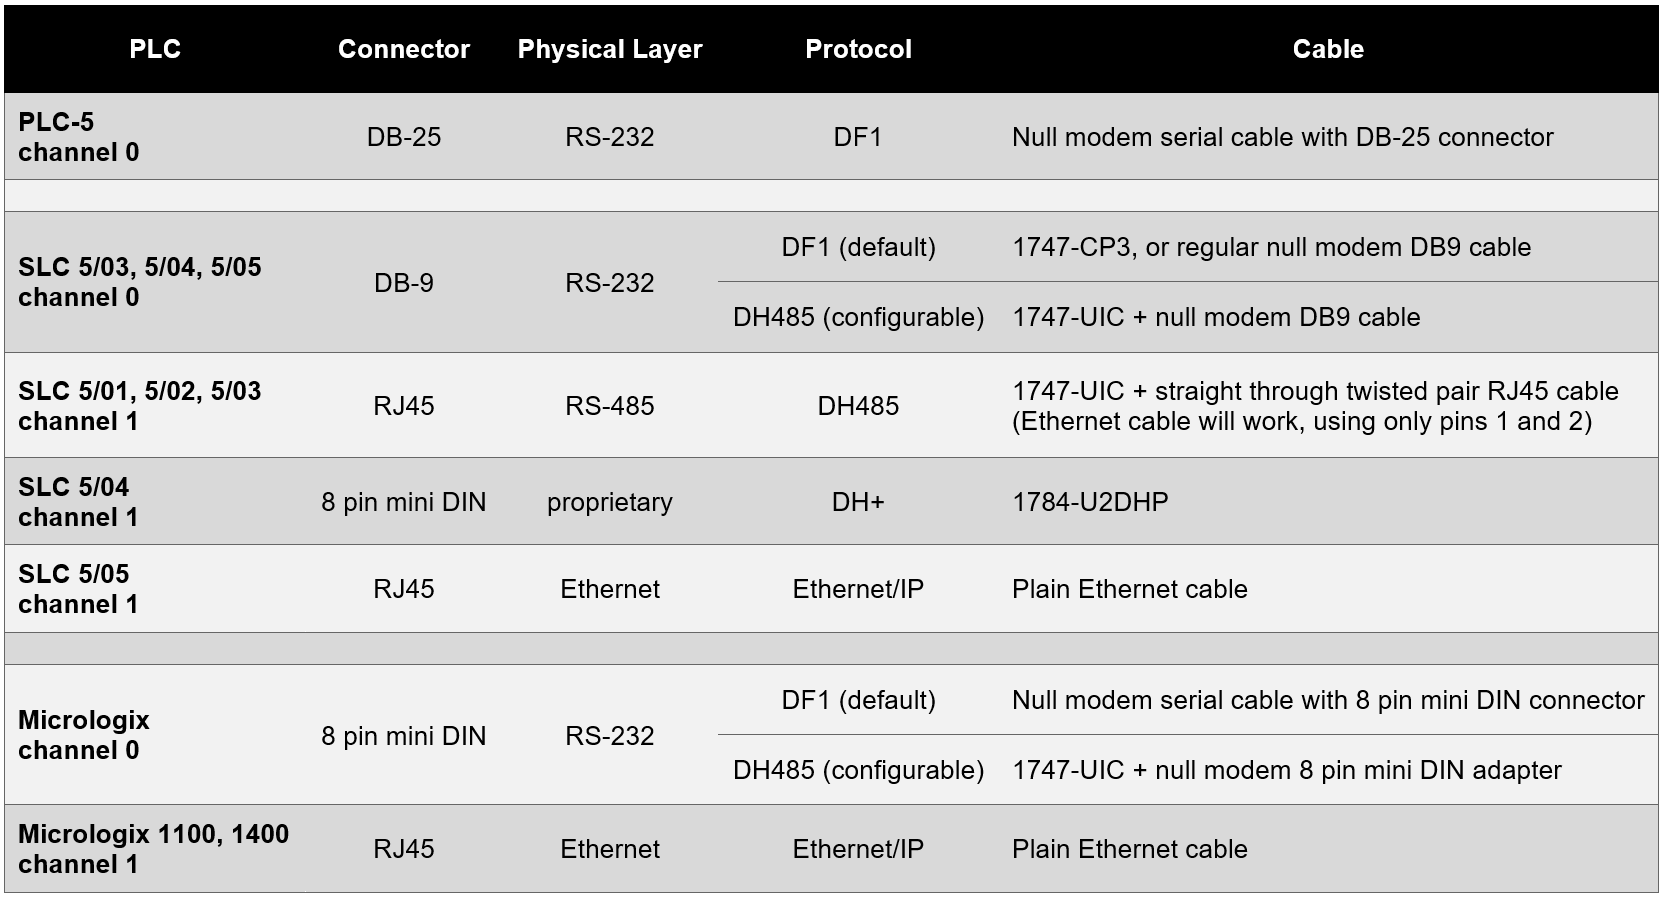 Summary of Allen-Bradley PLC Cables and Protocols